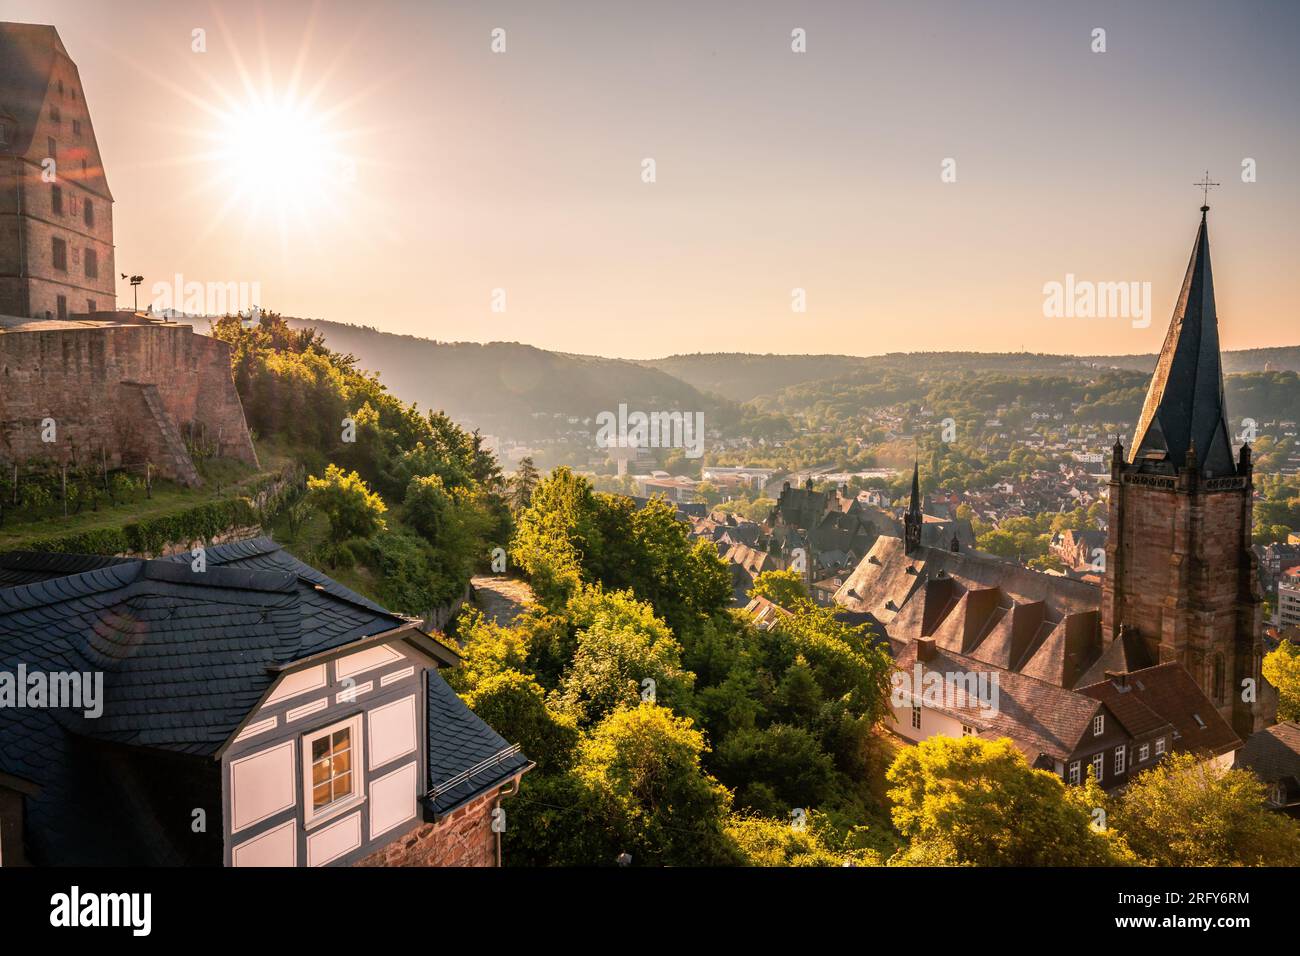 The beautiful university town of Marburg an der Lahn. Great historic old town with many half-timbered houses and small alleys. Wheelhouse, squares Stock Photo